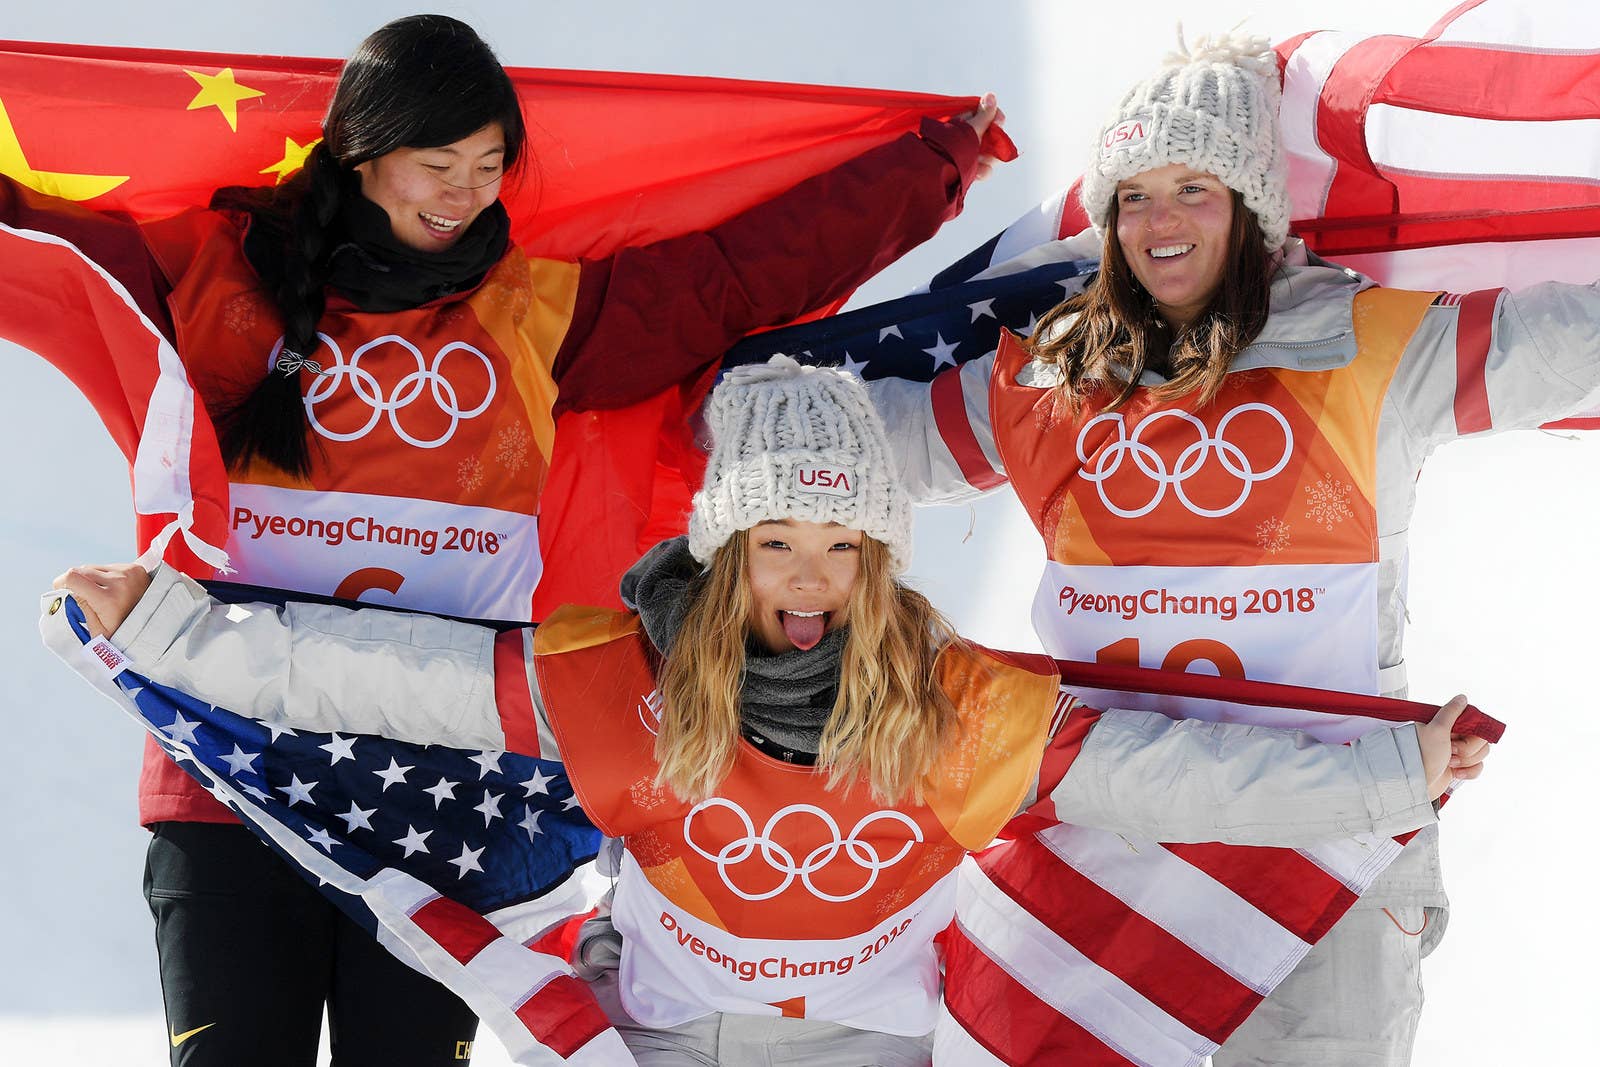 From left: Silver medalist Jiayu Liu of China, gold medalist Chloe Kim of the United States, and bronze medalist Arielle Gold of the United States pose during the victory ceremony for the Snowboard Ladies' Halfpipe Final on day four of the PyeongChang 2018 Winter Olympic Games on Feb. 13, in Pyeongchang-gun, South Korea.